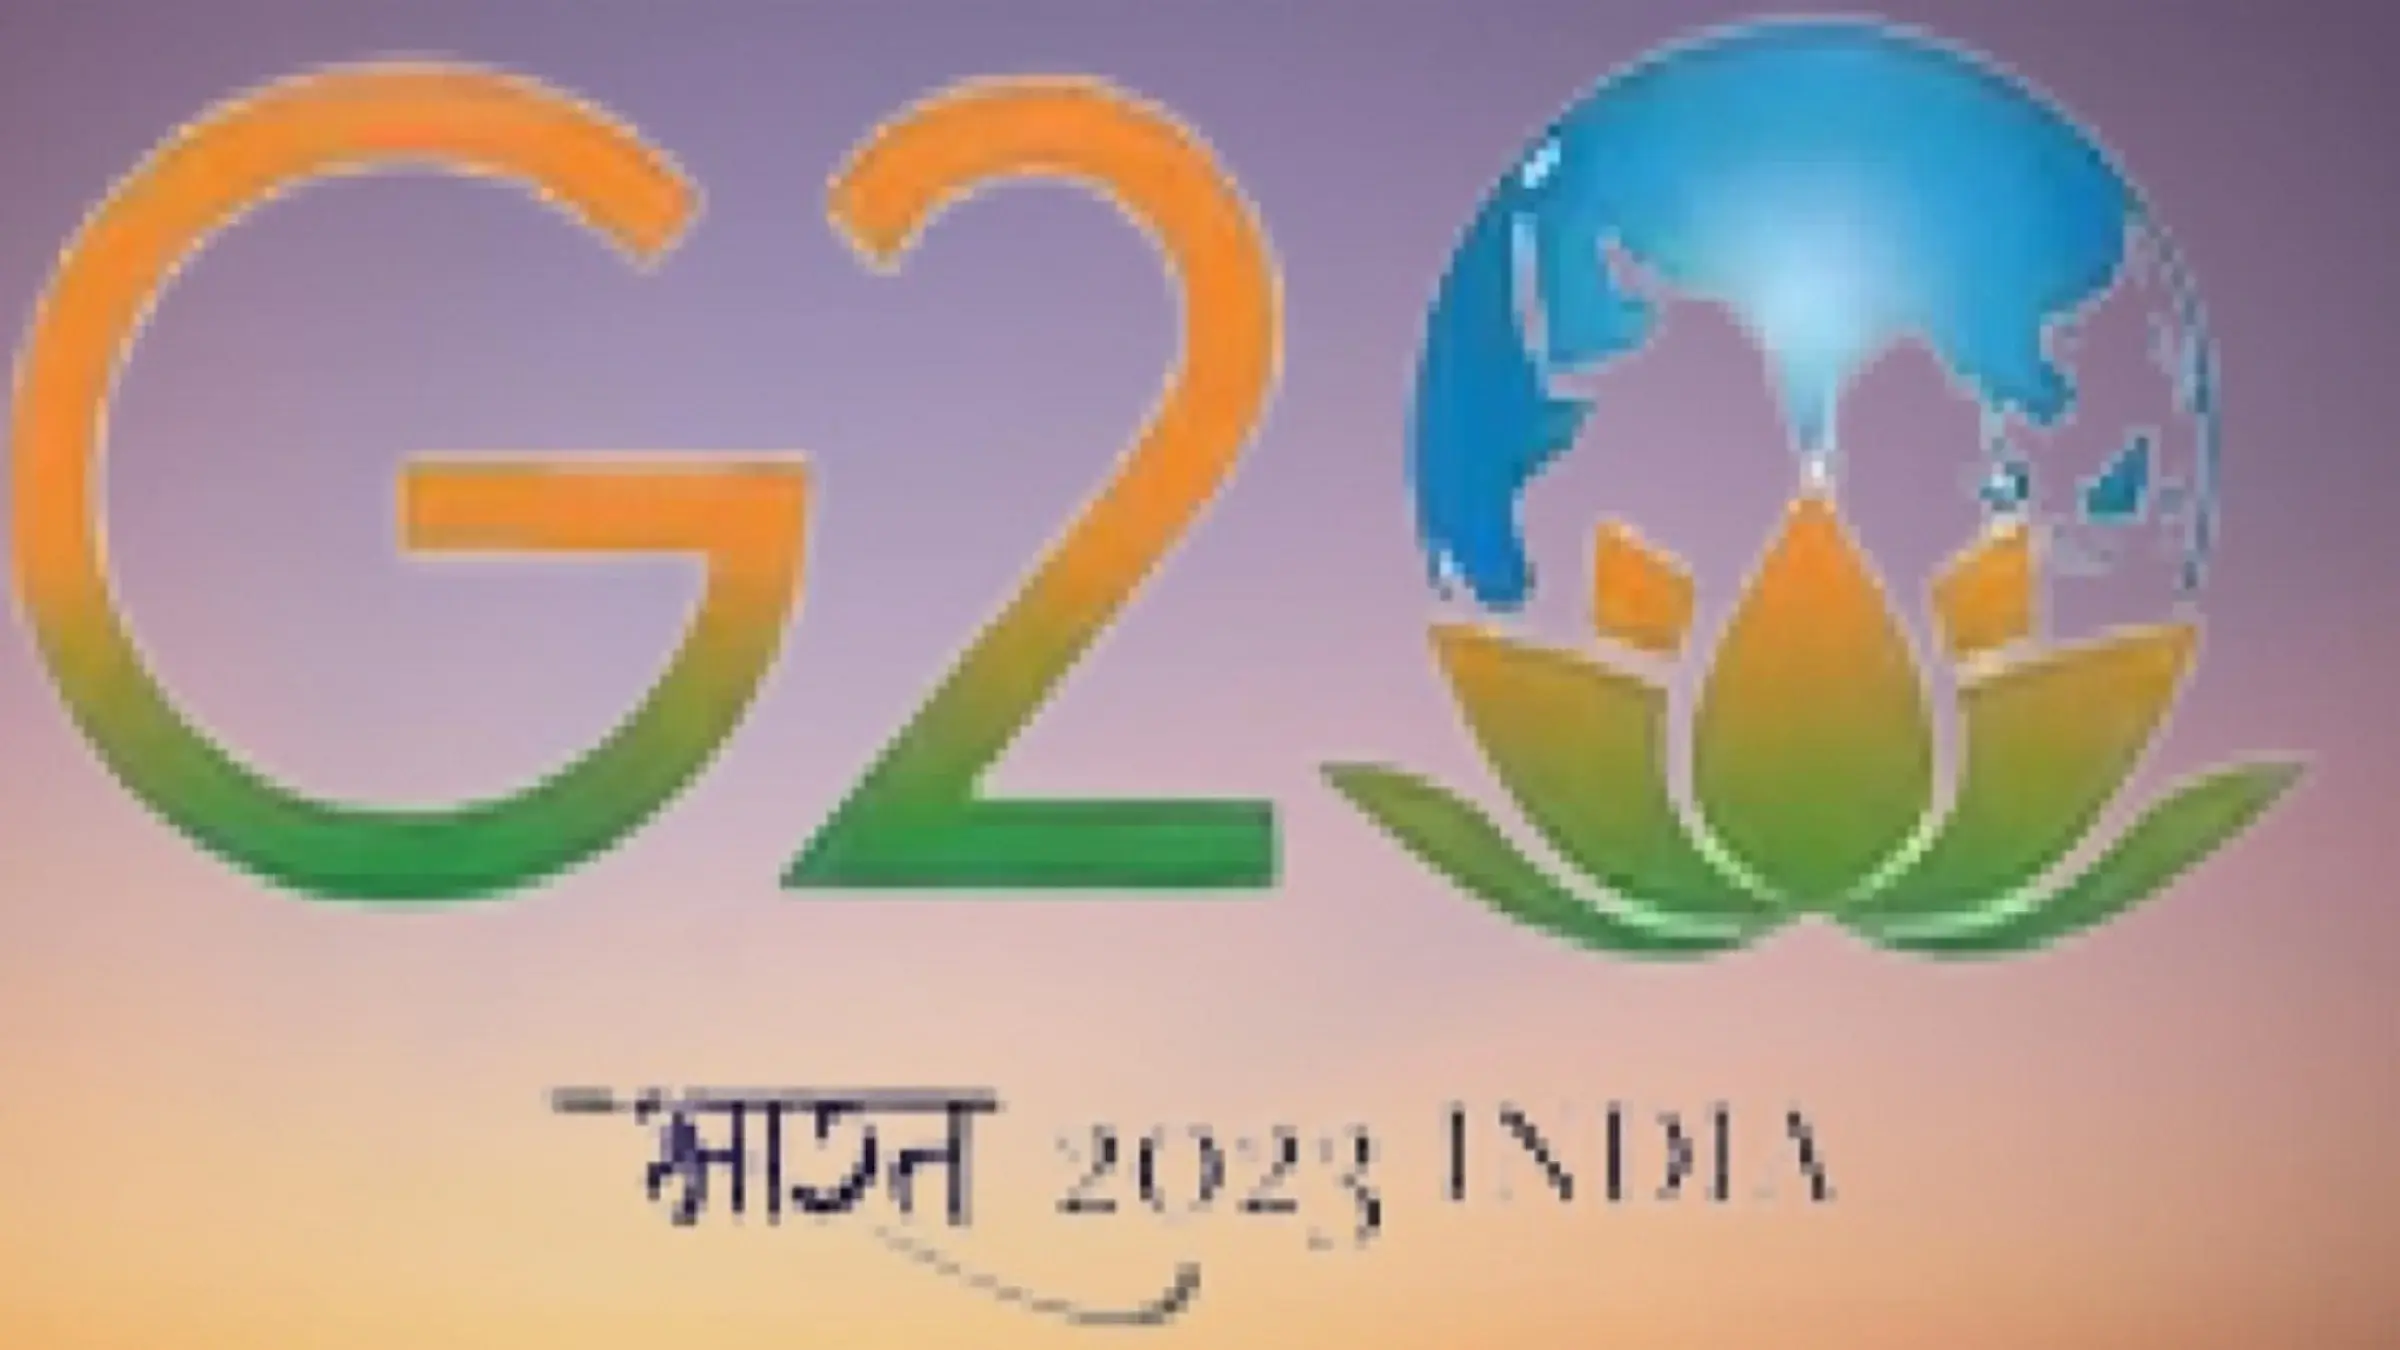 G20 Summit A Global Economic and Political Gathering